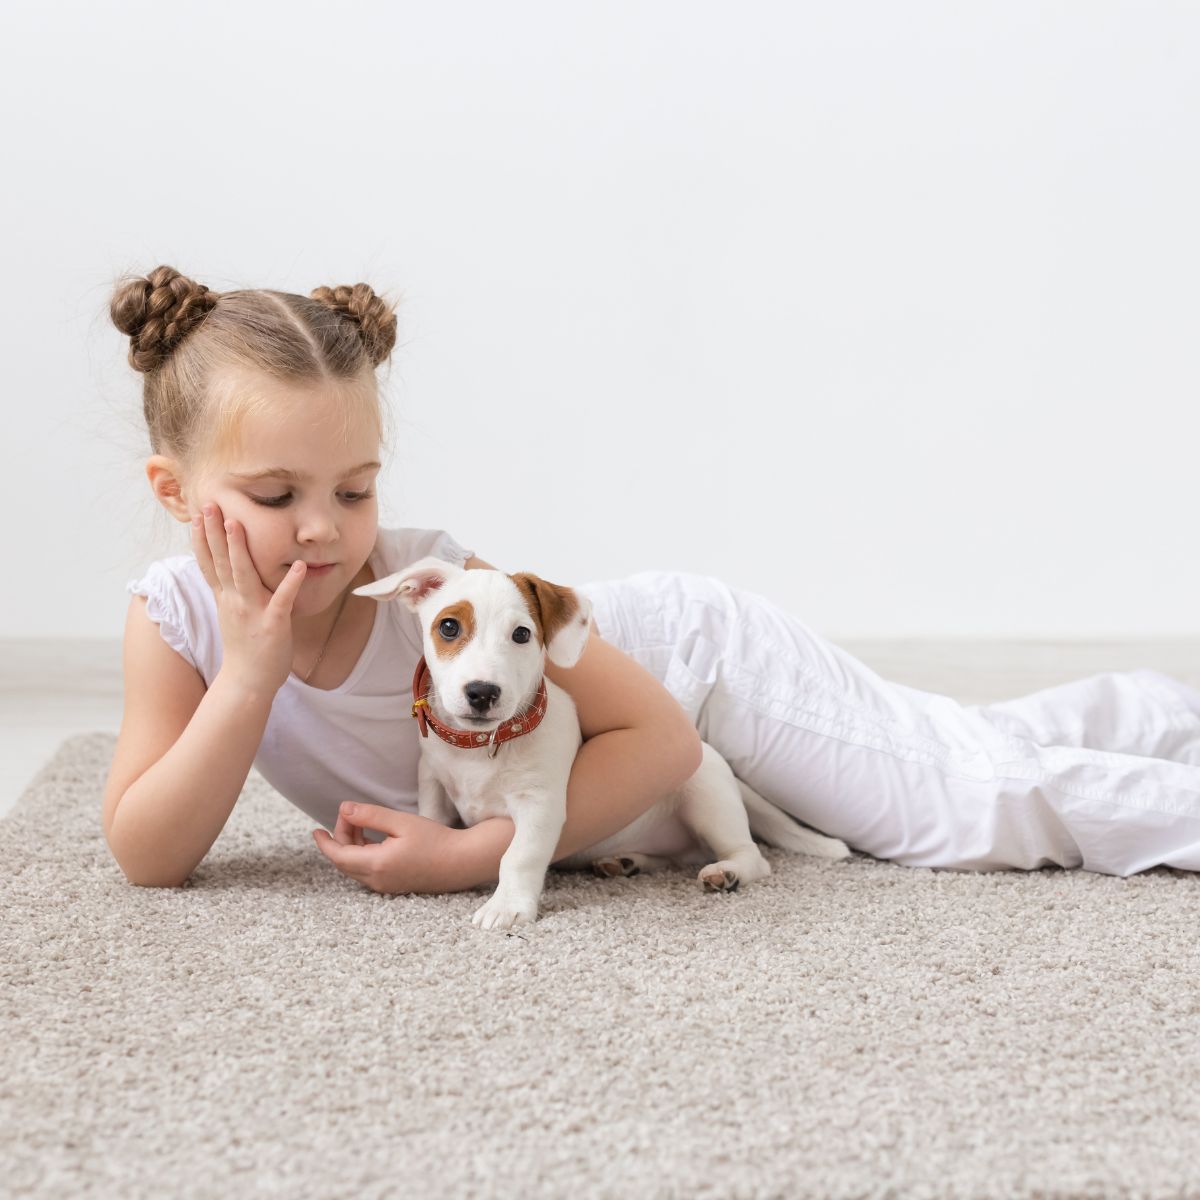 A little girl laying on the carpet with a young puppy.